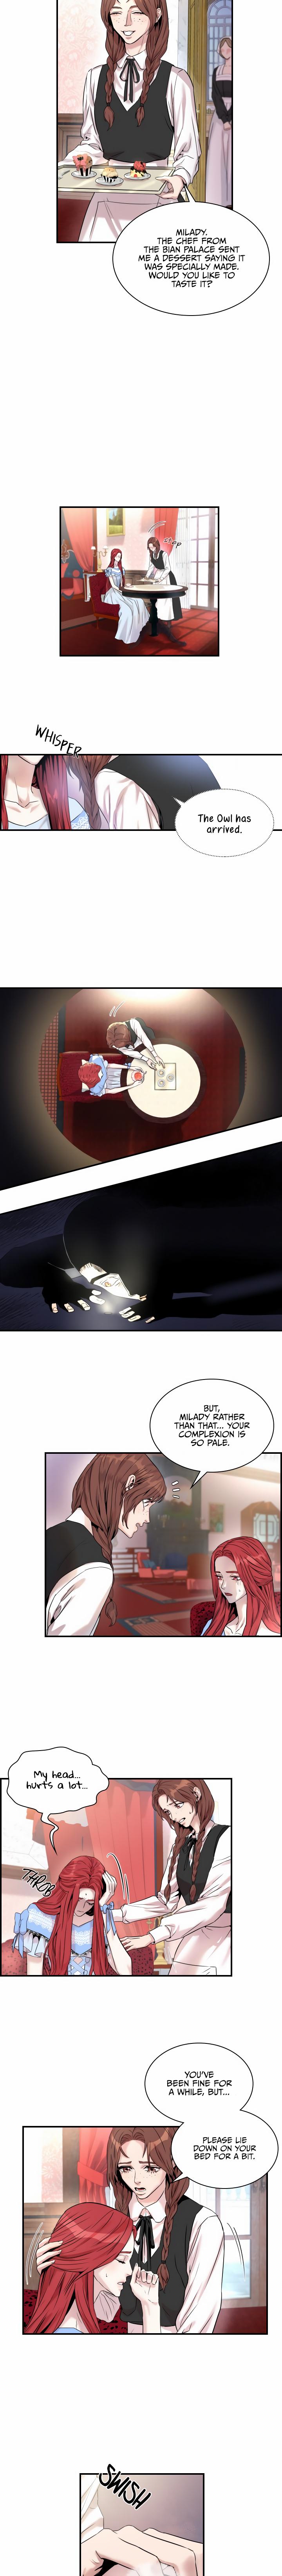 Aideen - Chapter 7 Page 2